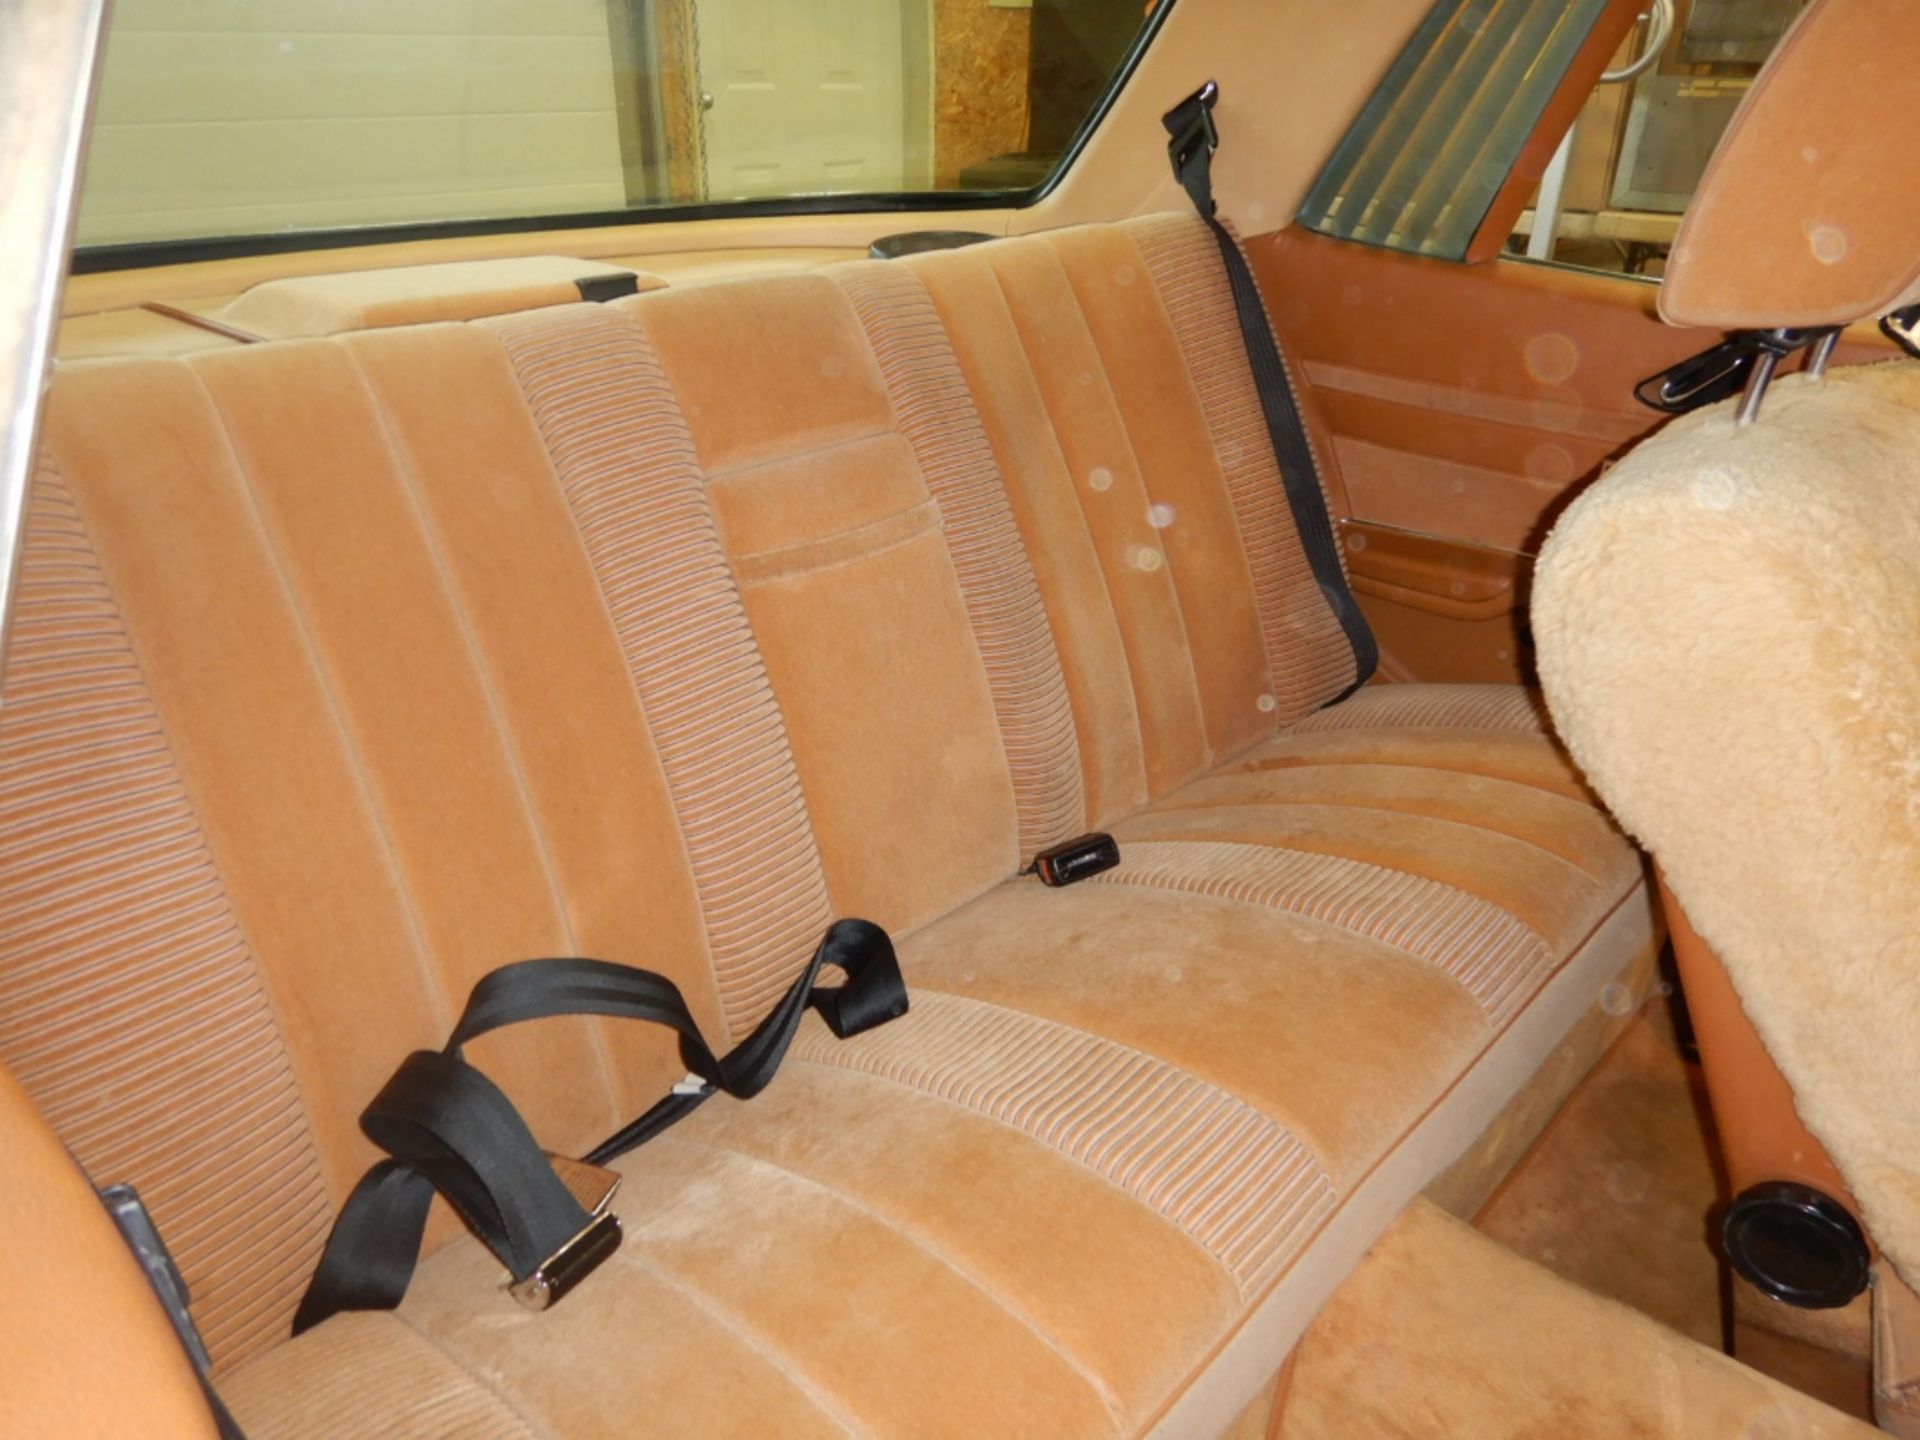 1978 MERCEDES-BENZ 450 SL C COUPE CAR, 2 DR, 2WD, AT, GAS, 227,849KMS, ONE OWNER - Image 7 of 19